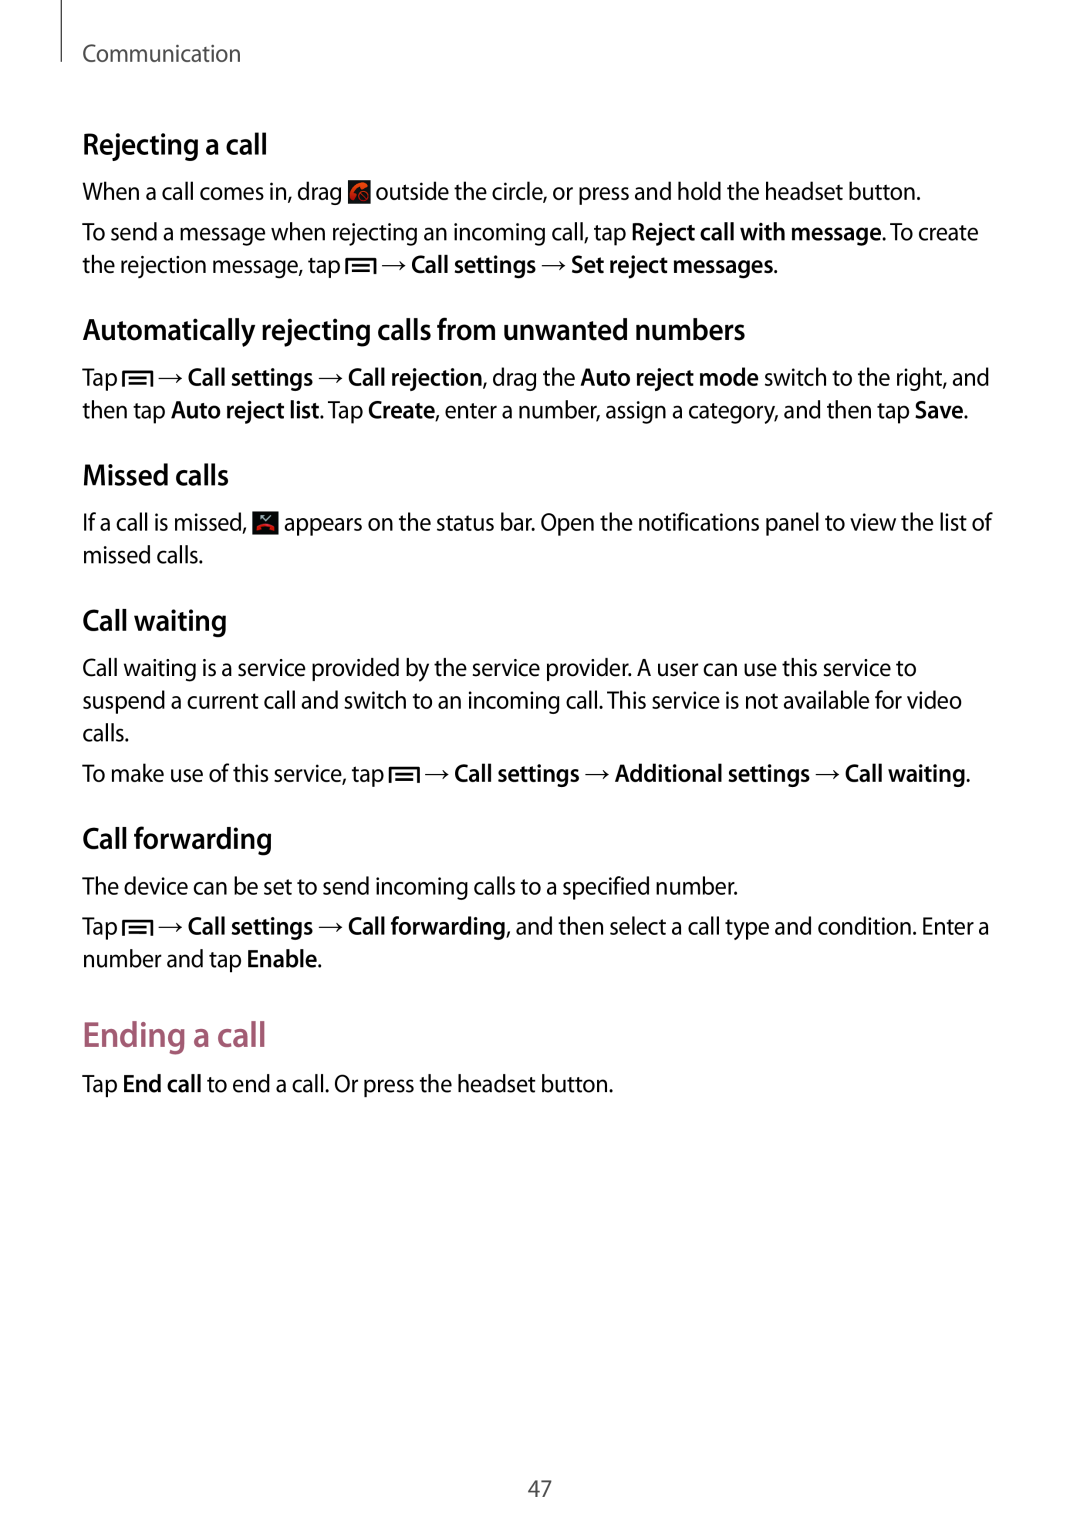 Samsung GT-I8190RWNETL Ending a call, Rejecting a call, Automatically rejecting calls from unwanted numbers, Missed calls 